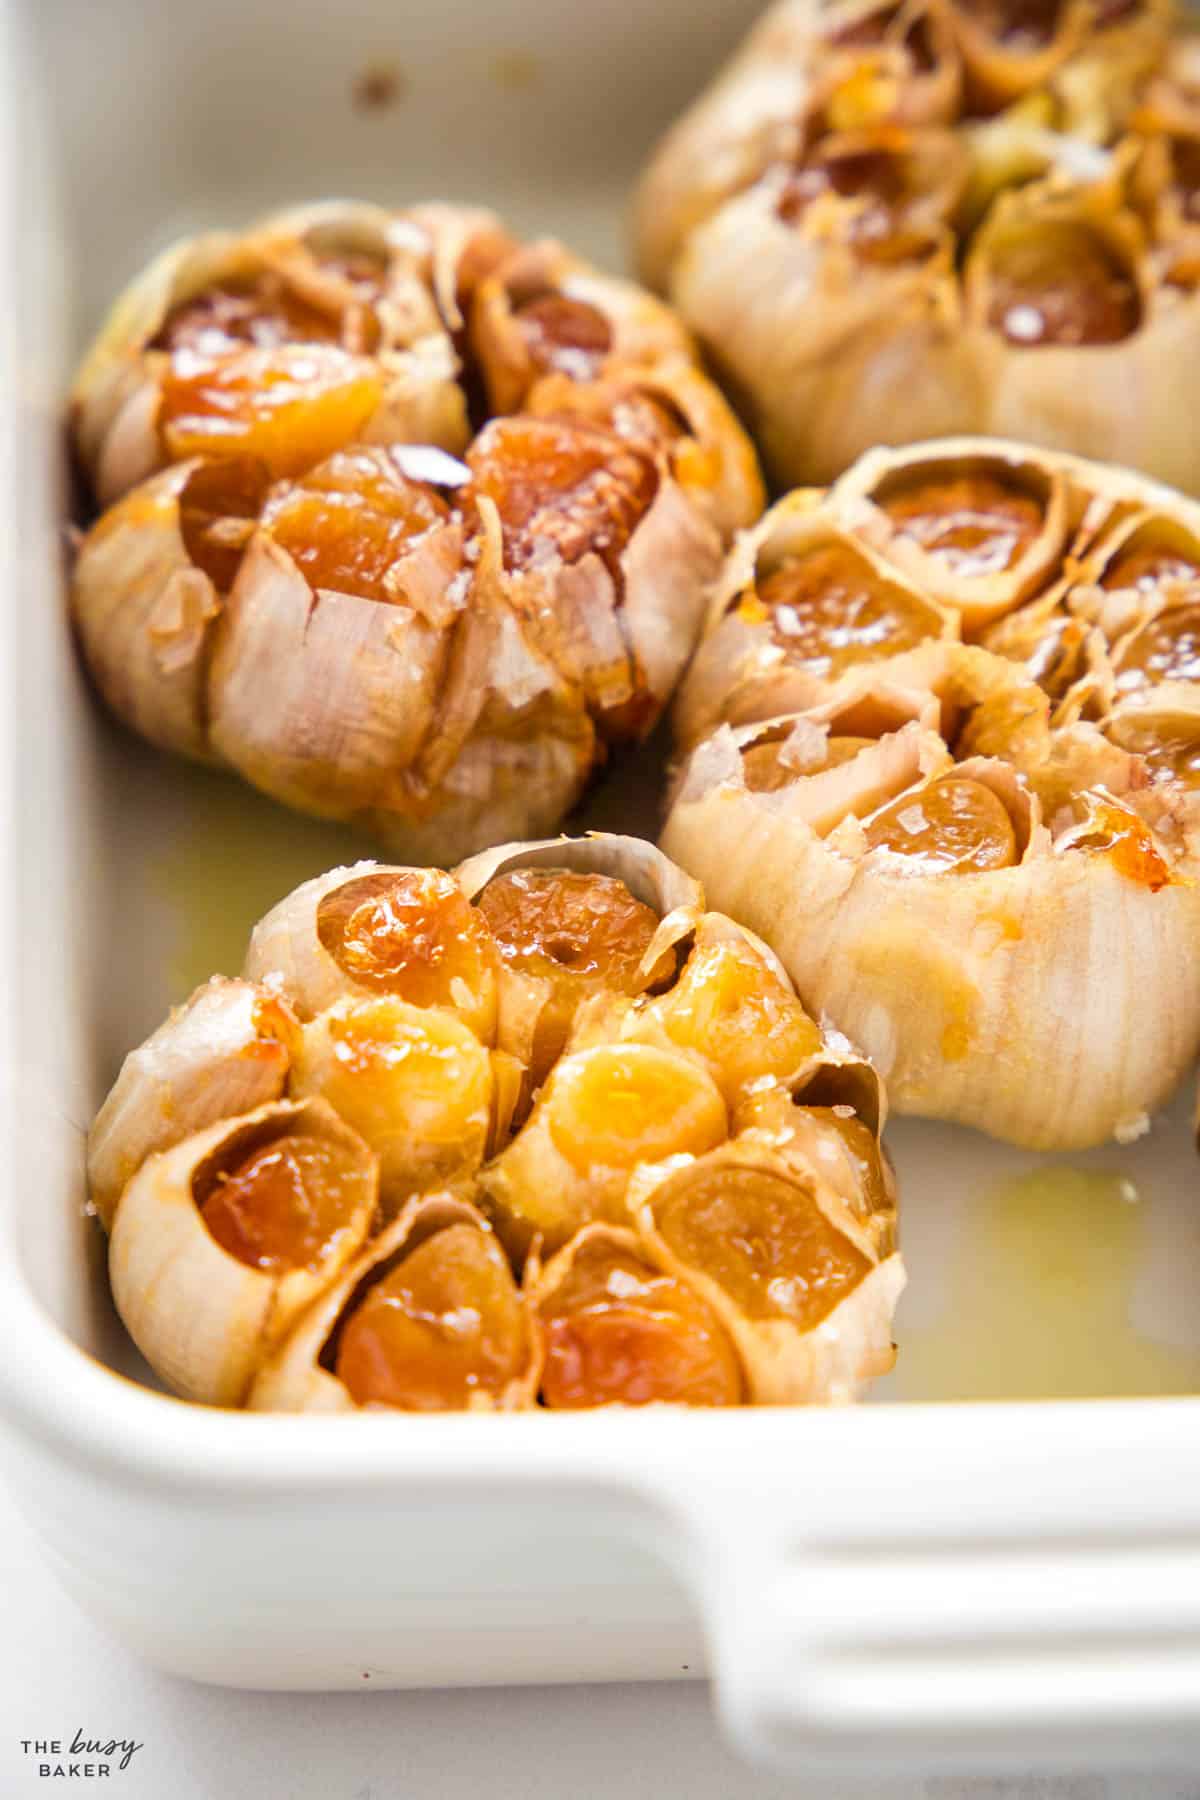 oven roasted garlic in a baking dish